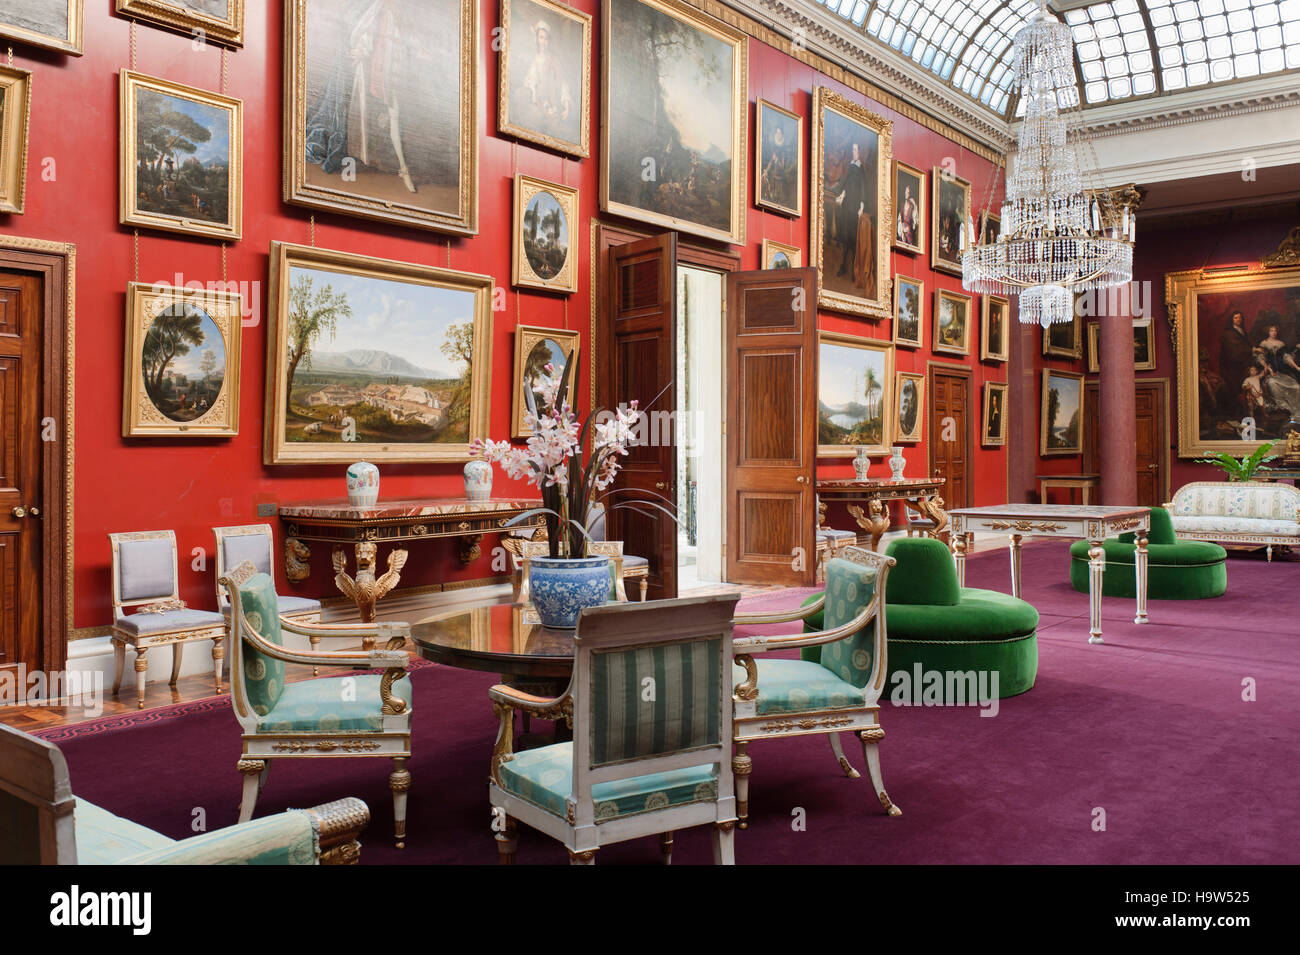 The Picture Gallery at Attingham Park, Shropshire. The Picture Gallery was designed by John Nash in 1805. Stock Photo